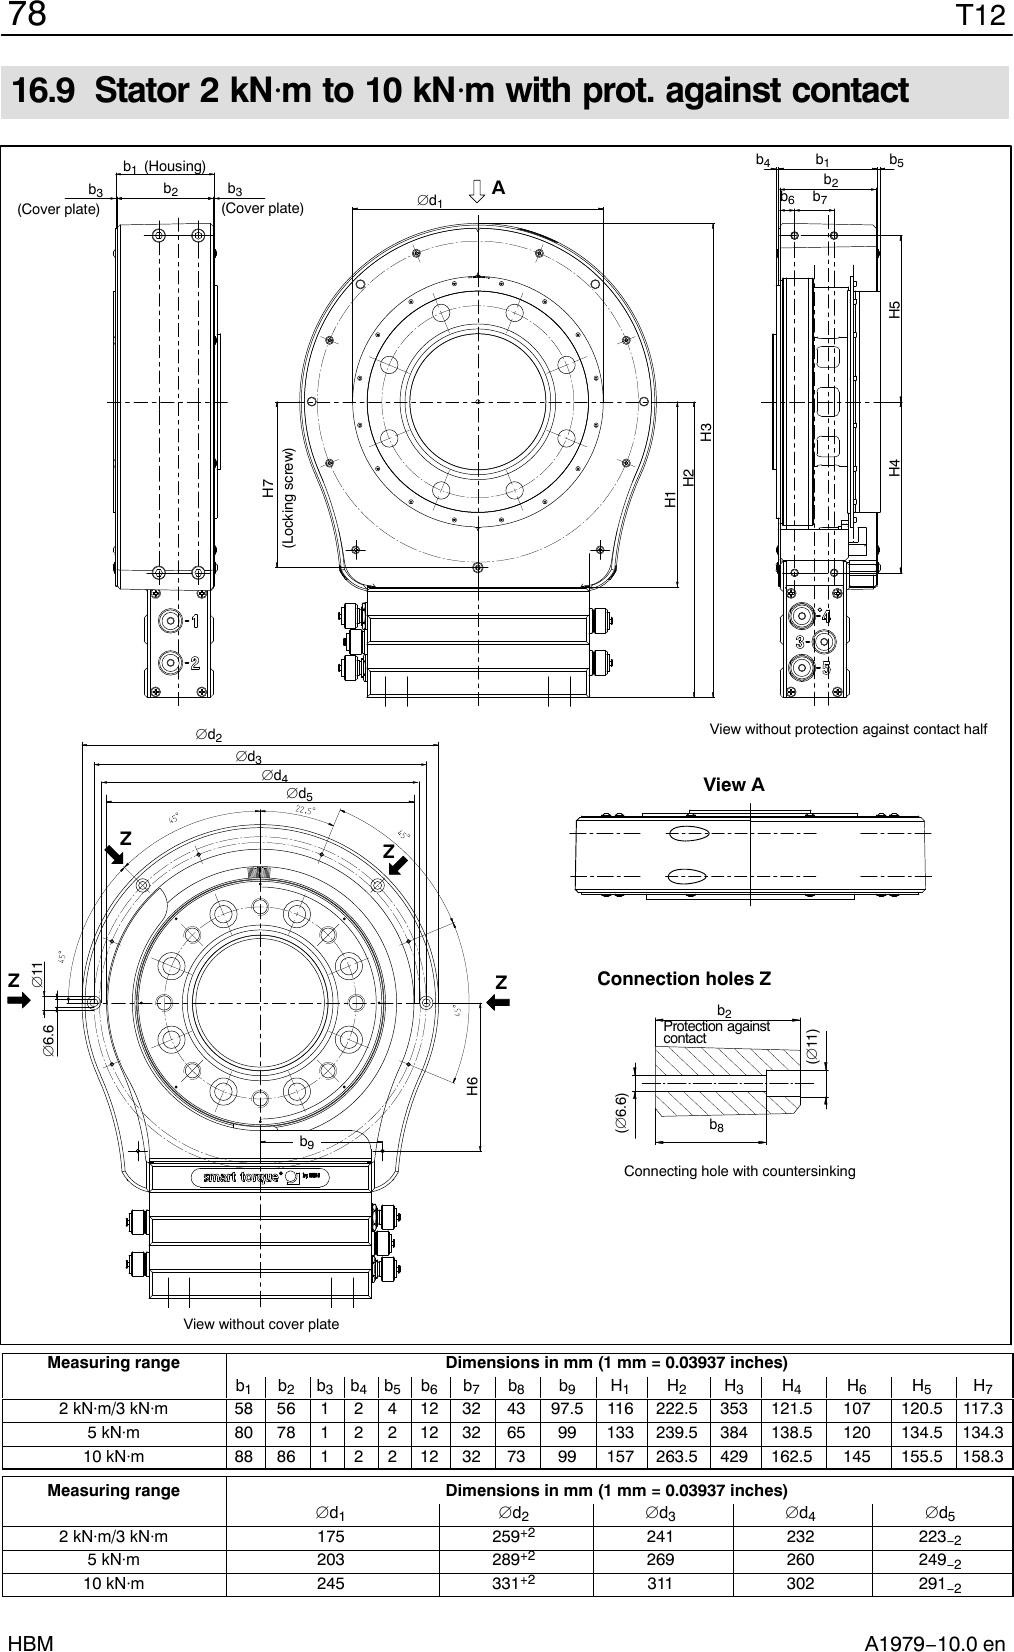 T1278A1979−10.0 enHBM16.9 Stator 2 kNm to 10 kNm with prot. against contactConnection holes ZView AAZZZZ(Housing)View without protection against contact halfView without cover plateProtection against contactConnecting hole with countersinking(Cover plate) (Cover plate) d1b2b3b3b1b4b2b5H1H2H3H4 H5d2d3d4b2b1b8116.6(6.6)(11)b6b7H6d5H7b9(Locking screw)Measuring range Dimensions in mm (1 mm = 0.03937 inches)b1b2b3b4b5b6b7b8b9H1H2H3H4H6H5H72 kNm/3 kNm 58 56 1 2 4 12 32 43 97.5 116 222.5 353 121.5 107 120.5 117.35 kNm 80 78 1 2 2 12 32 65 99 133 239.5 384 138.5 120 134.5 134.310 kNm 88 86 1 2 2 12 32 73 99 157 263.5 429 162.5 145 155.5 158.3Measuring range Dimensions in mm (1 mm = 0.03937 inches)d1d2d3d4d52 kNm/3 kNm 175 259+2 241 232 223−25 kNm 203 289+2 269 260 249−210 kNm 245 331+2 311 302 291−2